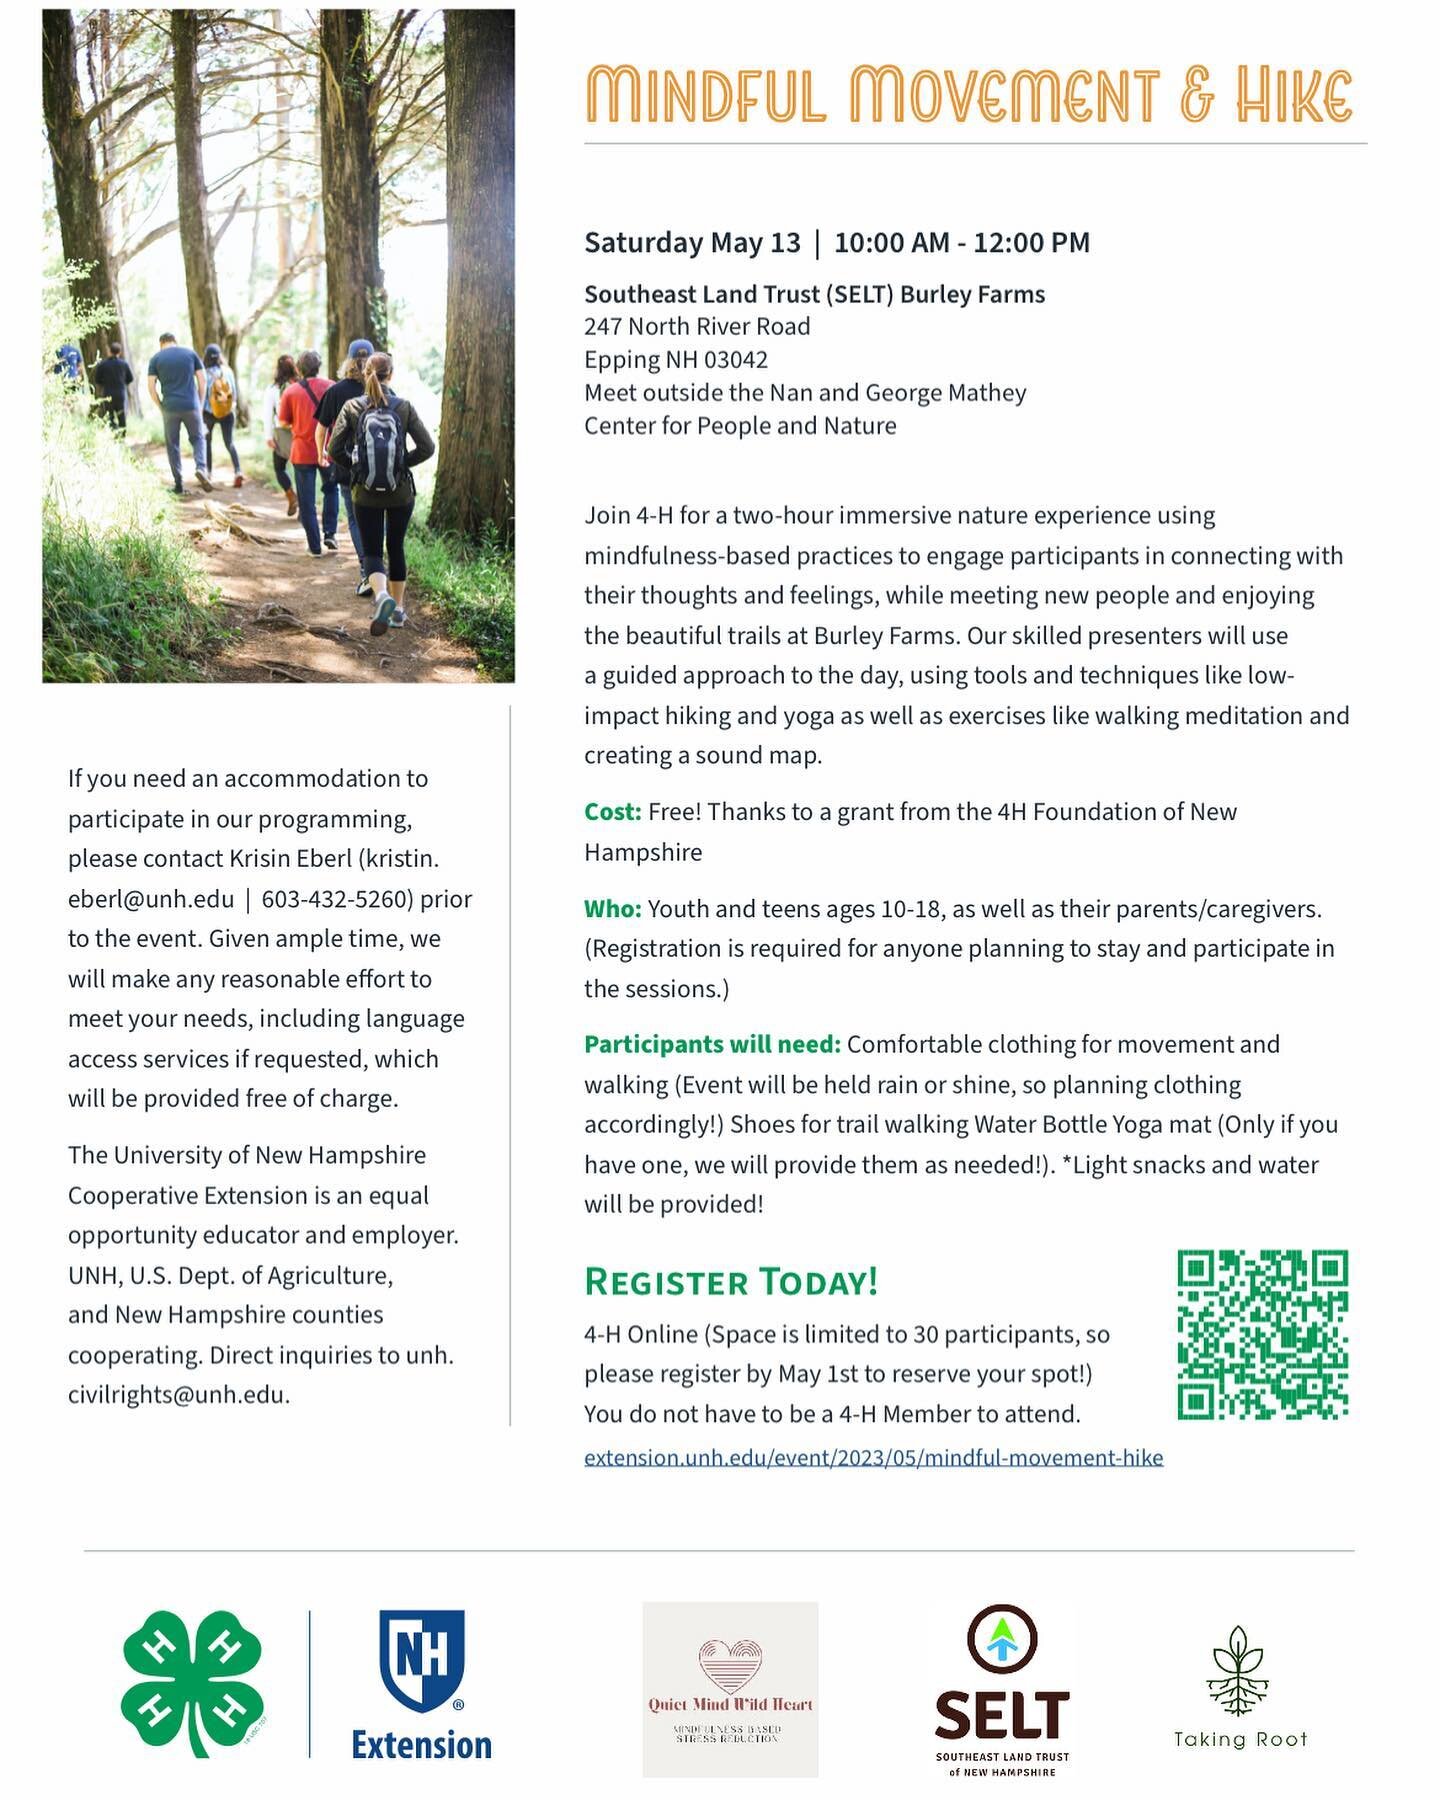 Excited to partner up again with UNH Health and Wellness Extension and 4-H for a Mindful Movement and Hike! 🥾 

This is a two-hour immersive nature experience using mindfulness-based practices to engage participants in connecting with their thoughts